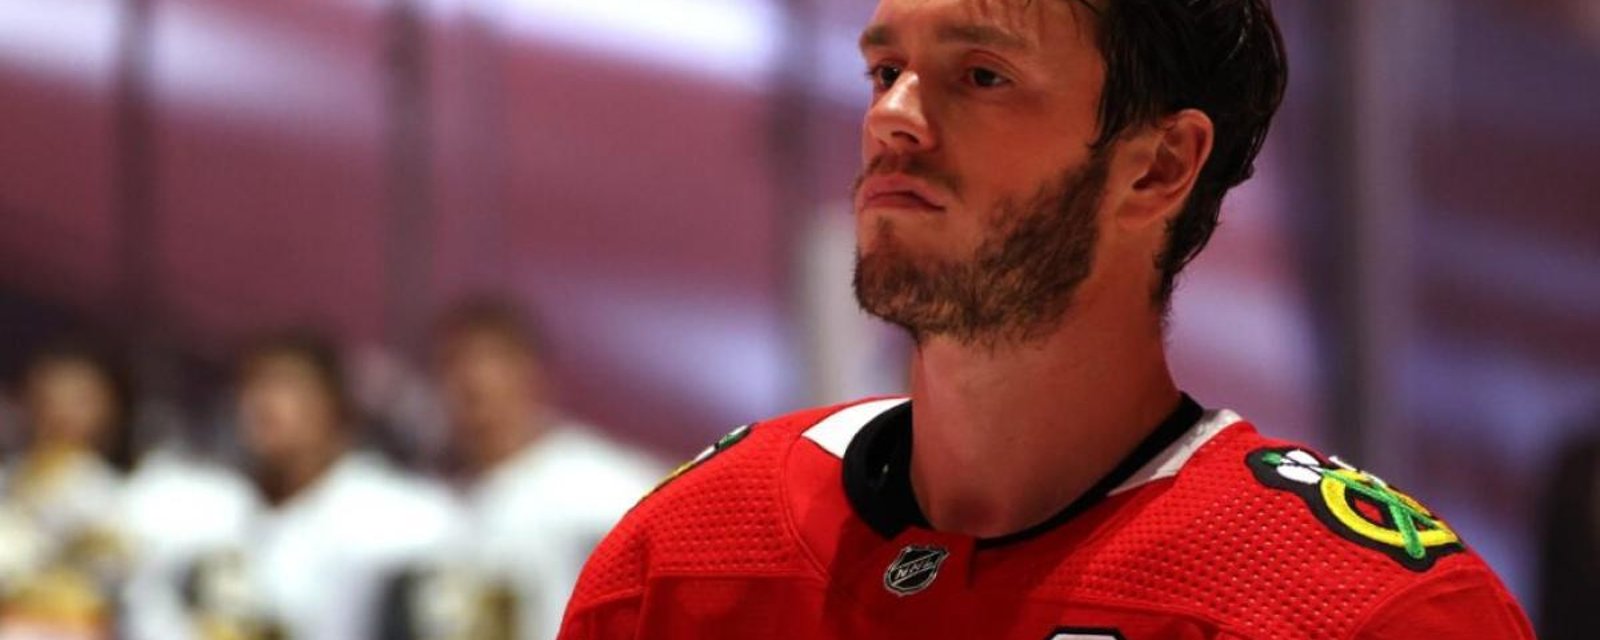 Hawks insider denies rumours that Toews has a “severe case” of ALS